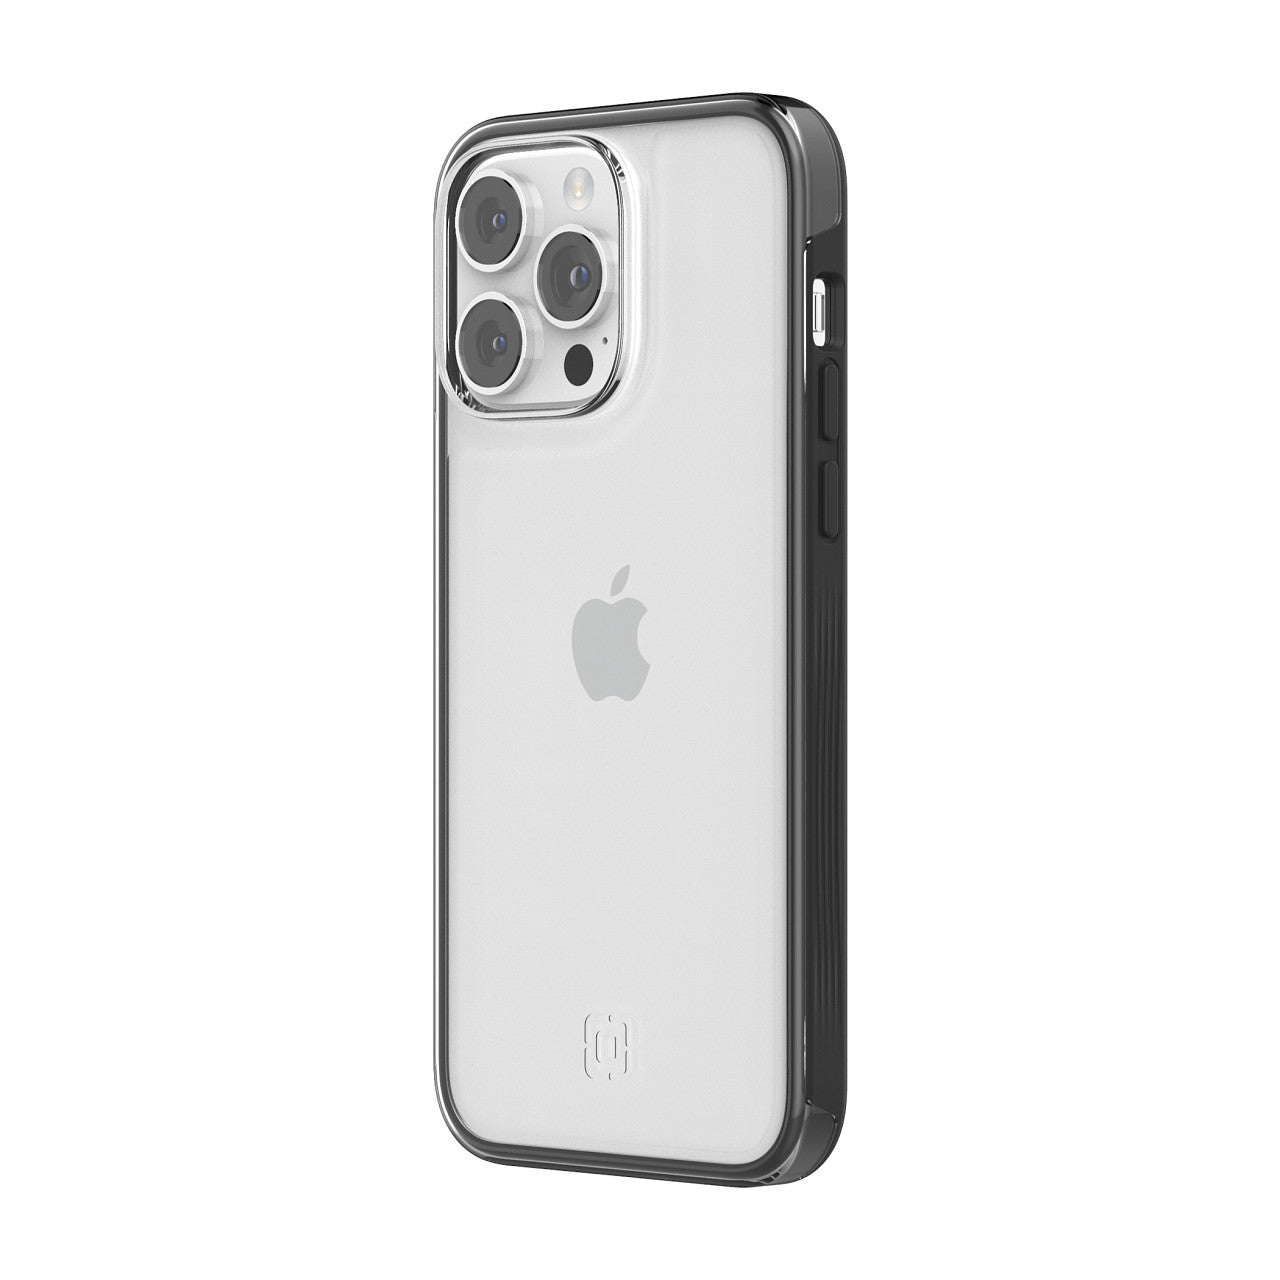 iPhone 14 Pro Max clear case